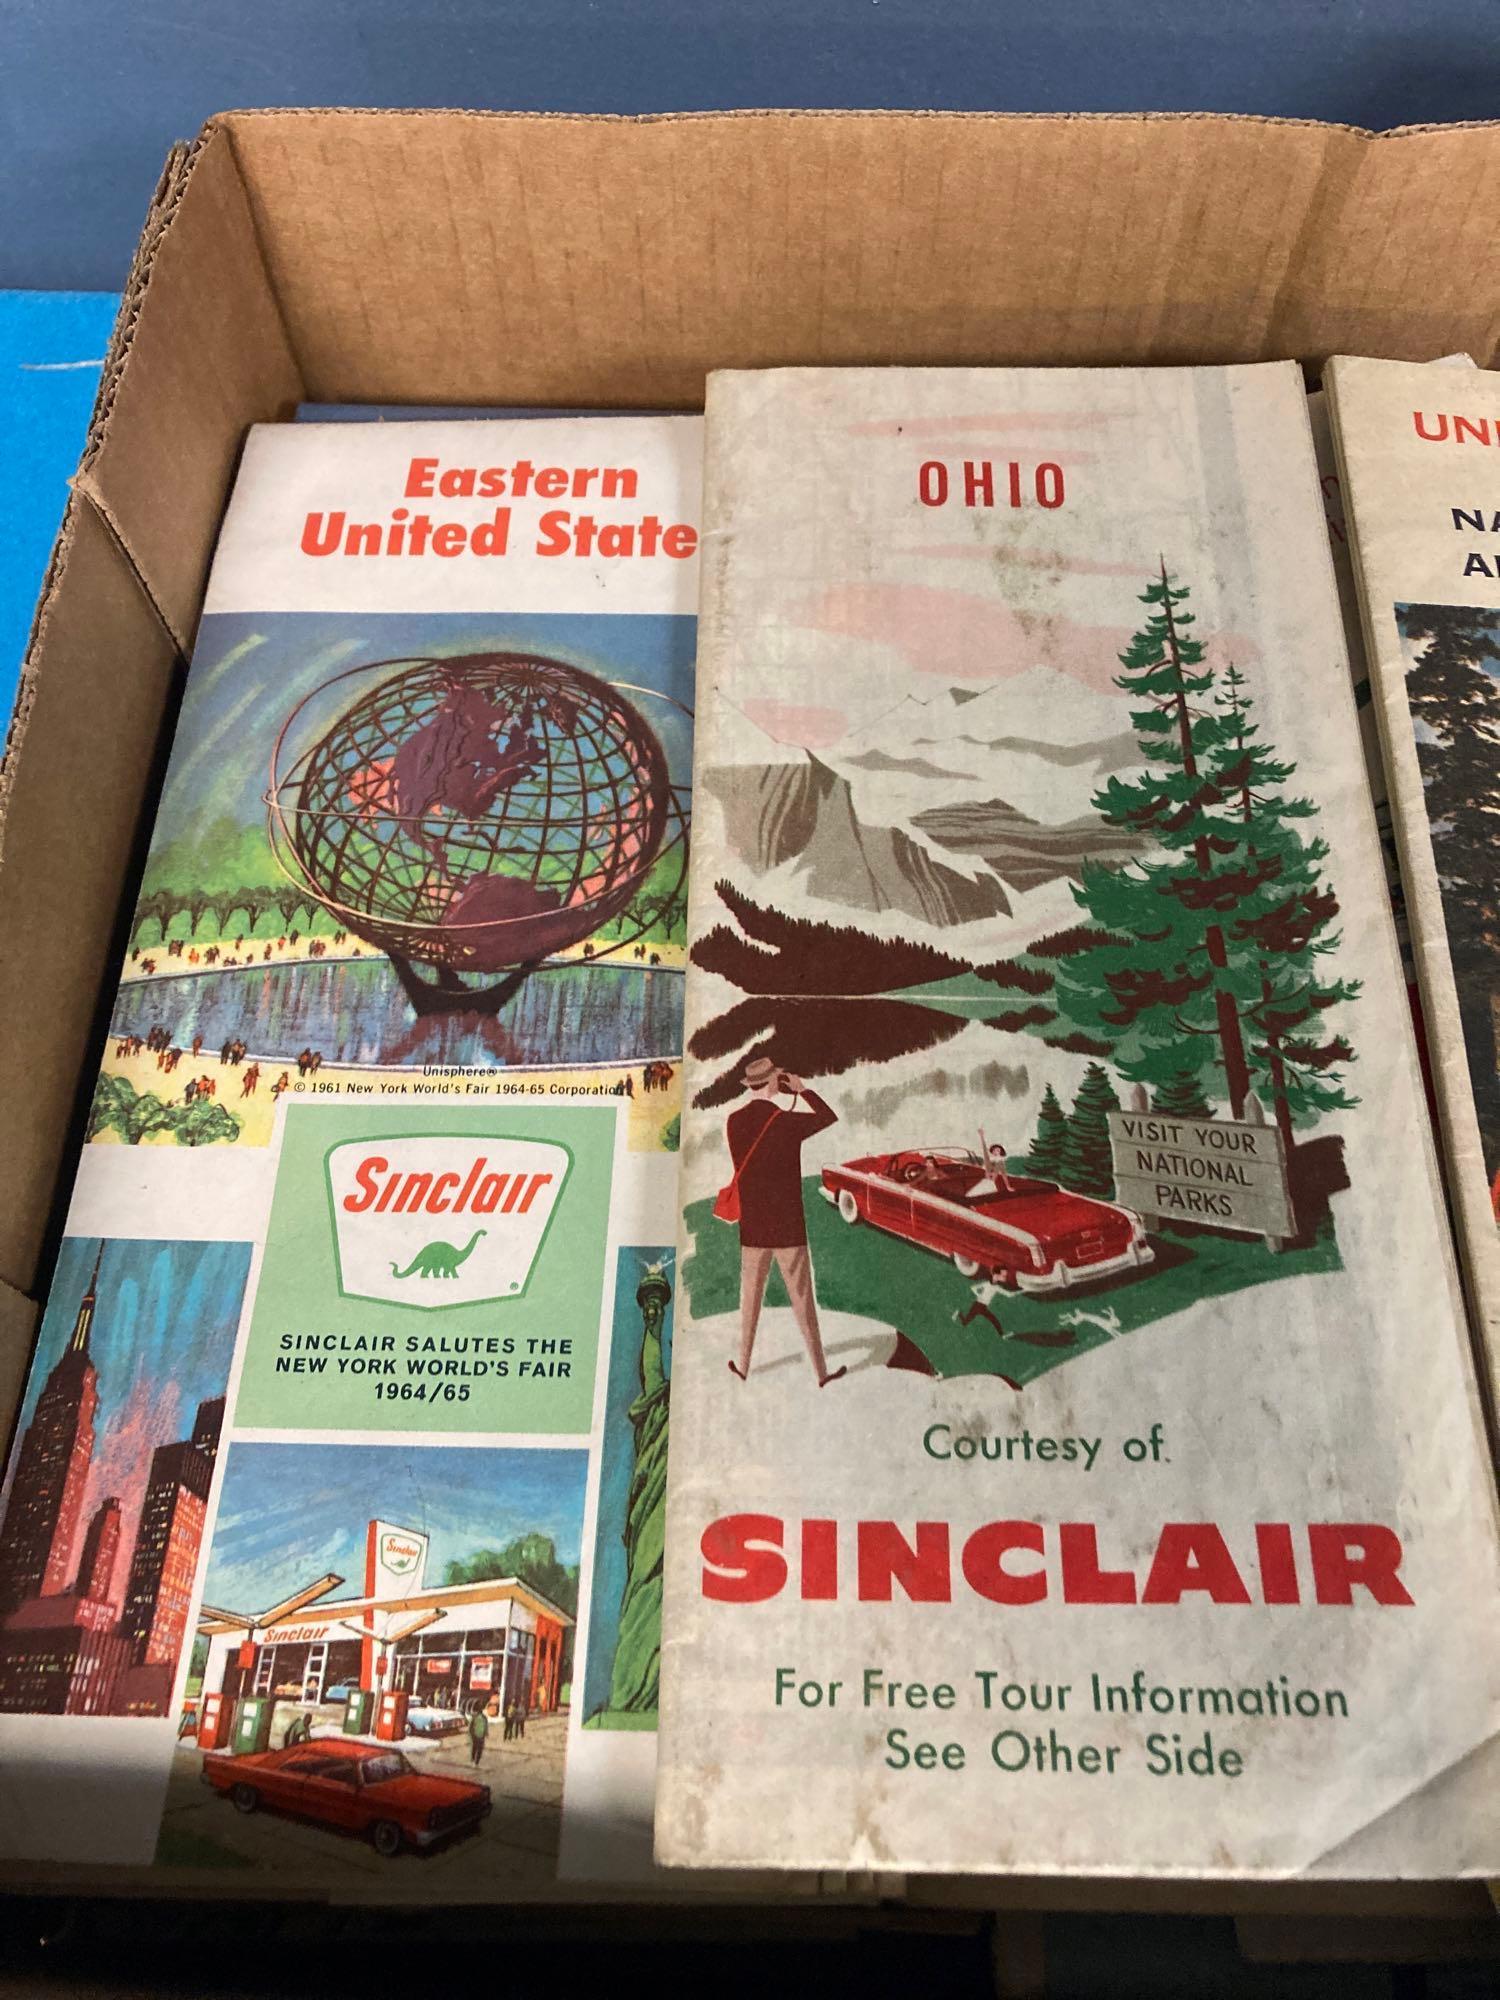 Goodyear blimp photos and US maps Sinclair maps and others